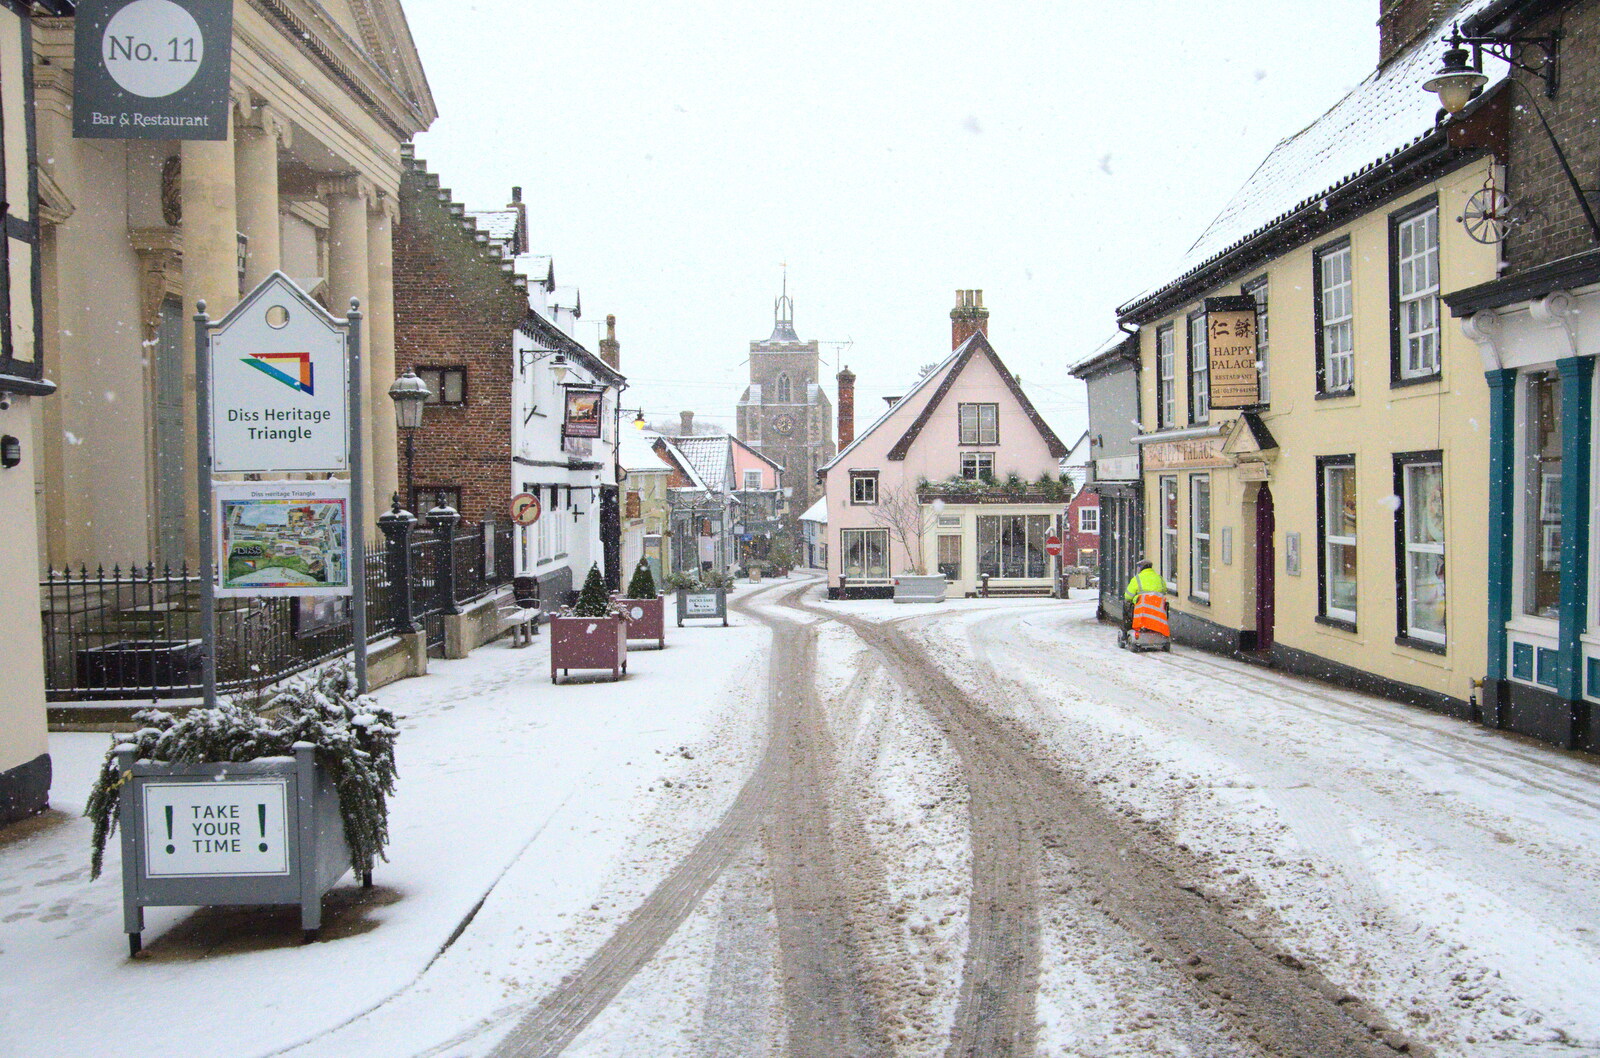 Diss Cornhall from A Snowy Morning, Diss, Norfolk - 16th January 2021